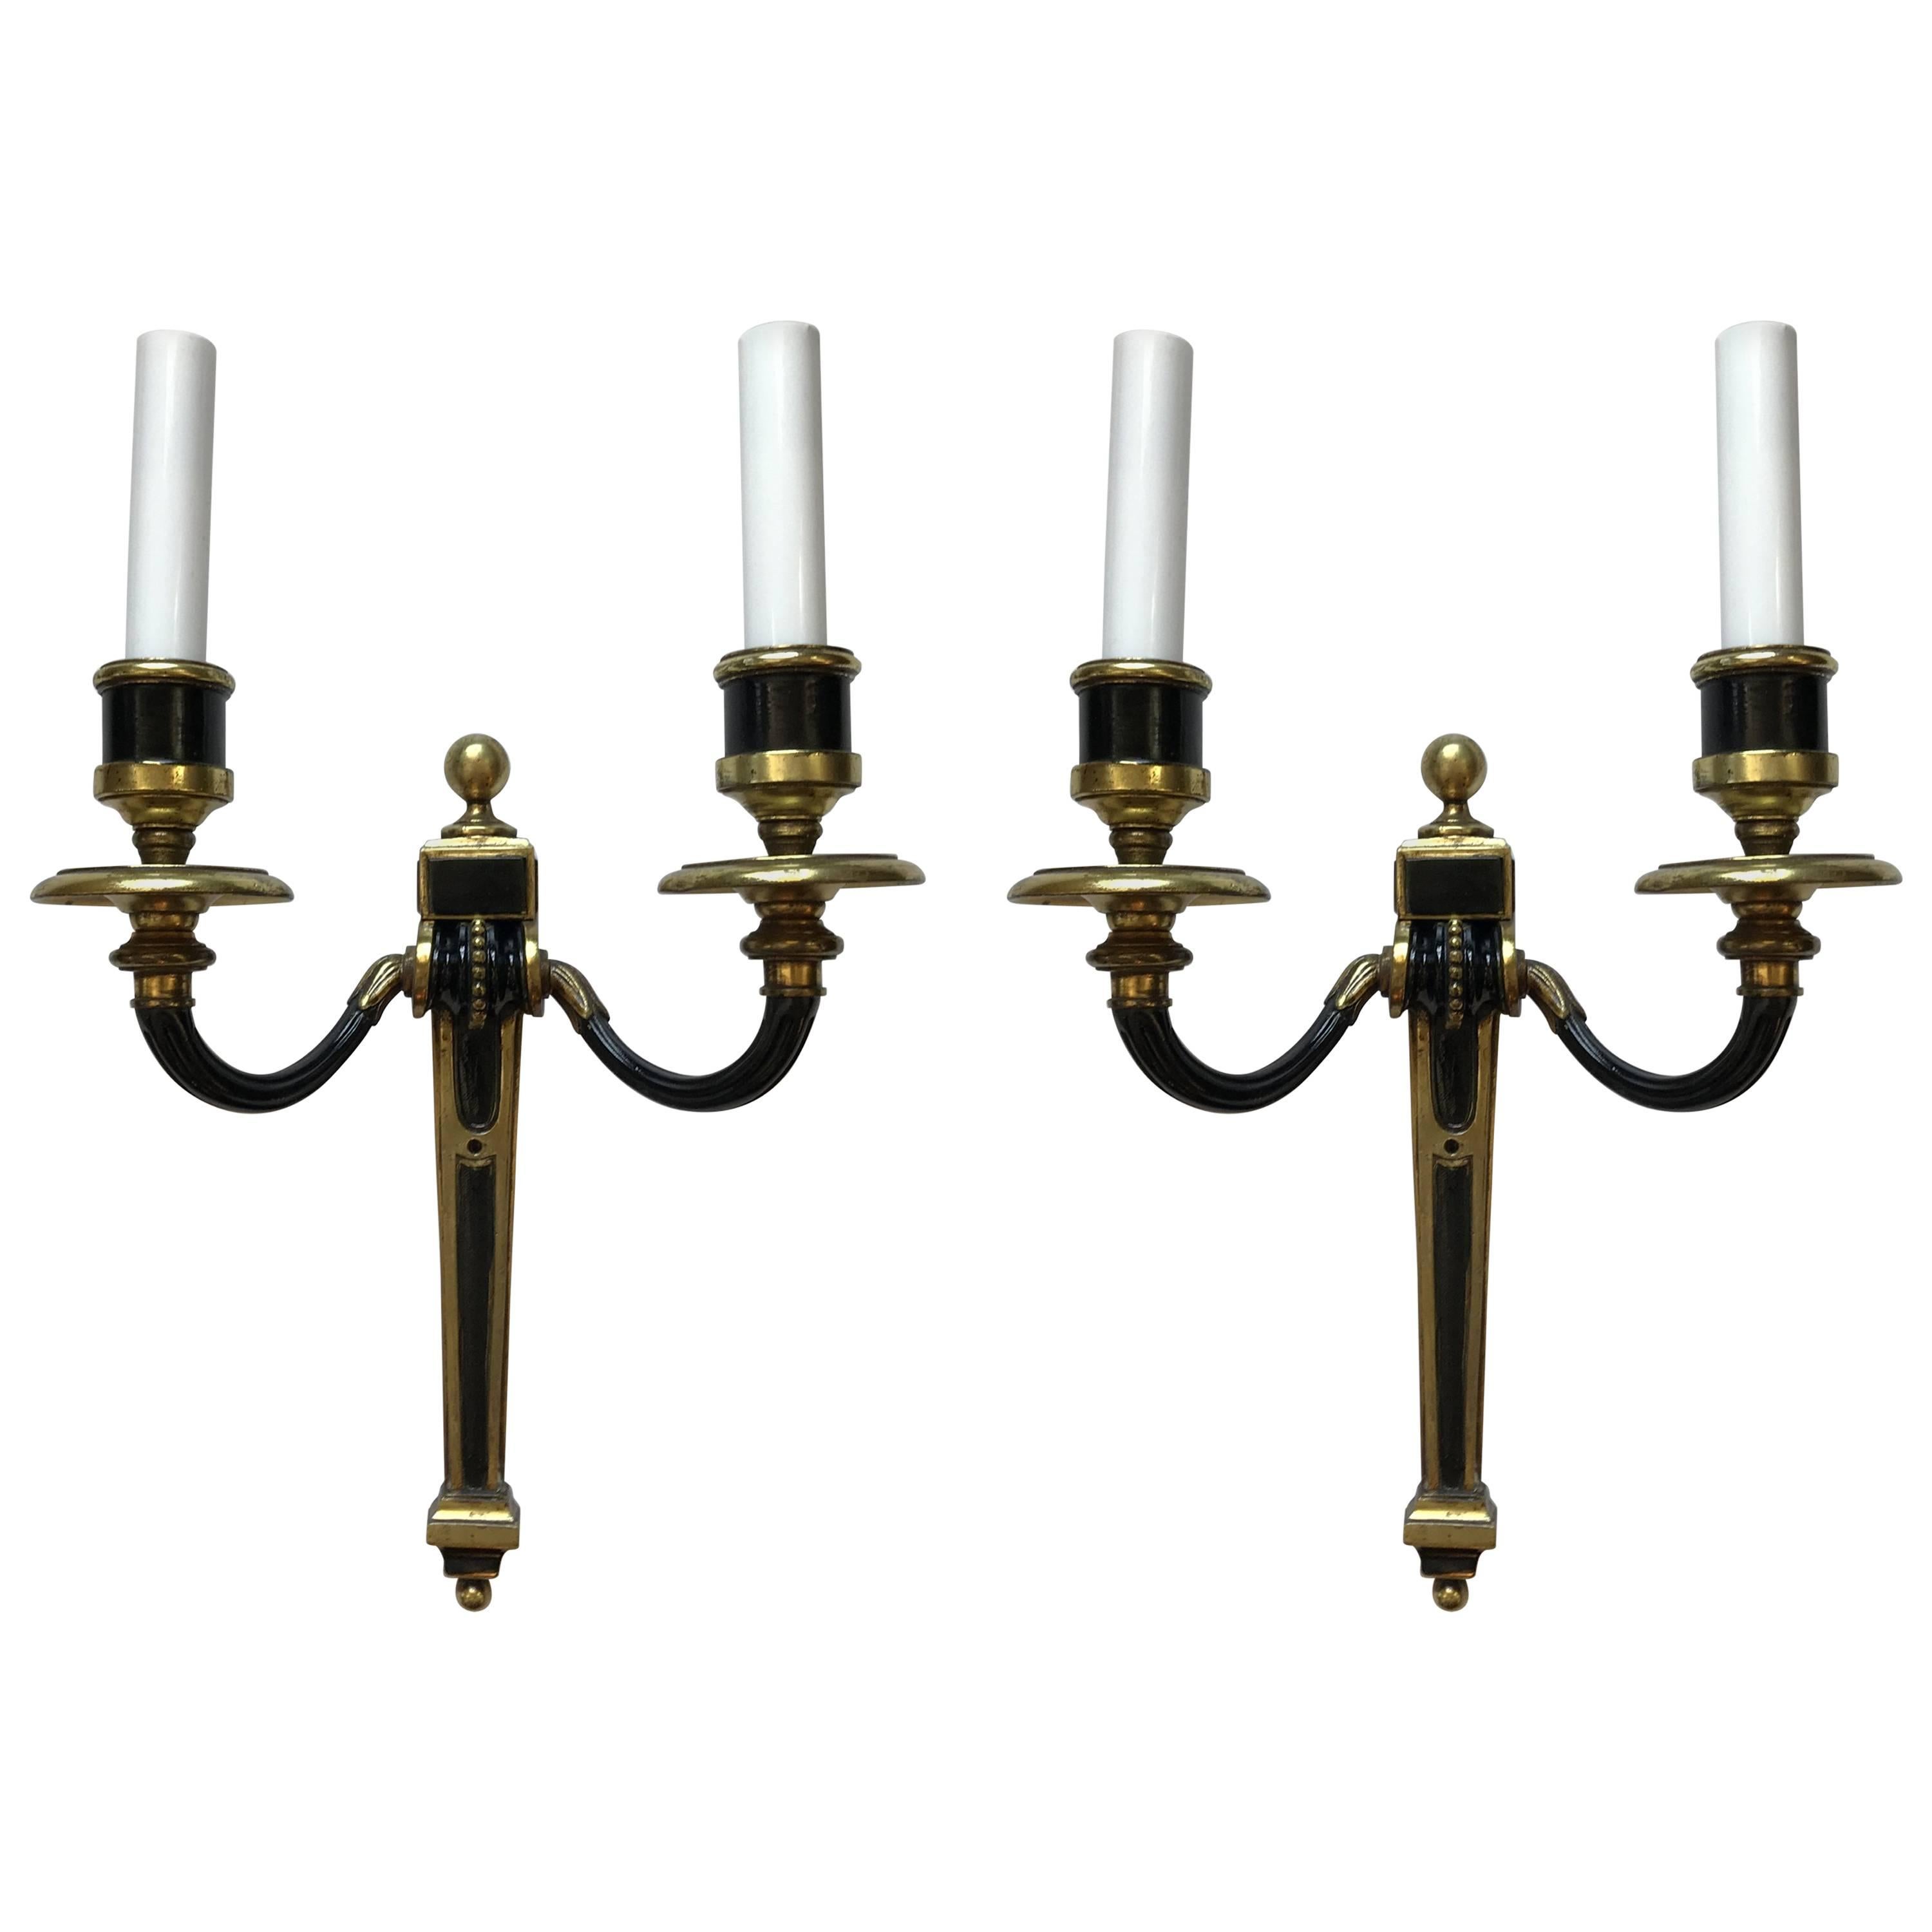 Wonderful Pair of Caldwell Bronze Patinated Regency Neoclassical Empire Sconces